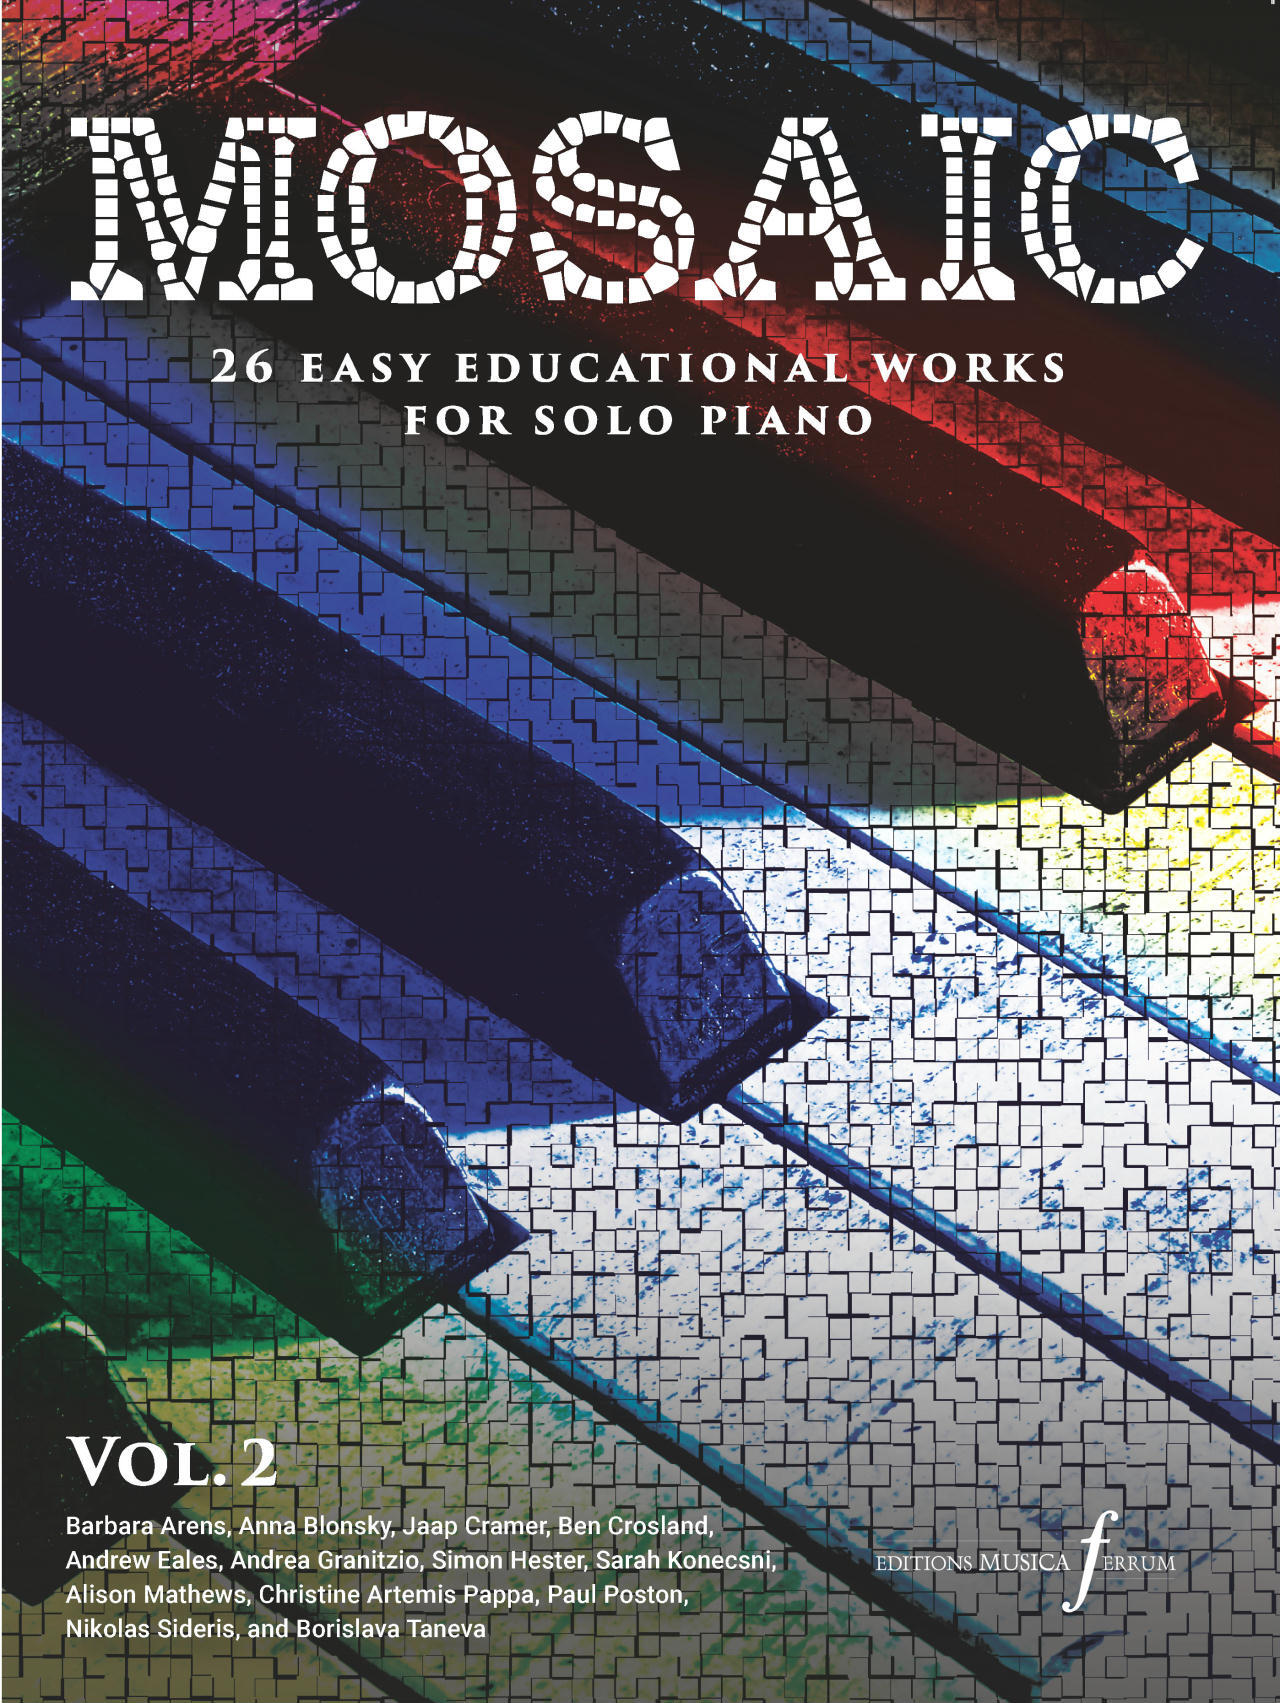 Musica Ferrum Mosaic, Volume 2 26 easy educational works for solo piano : photo 1